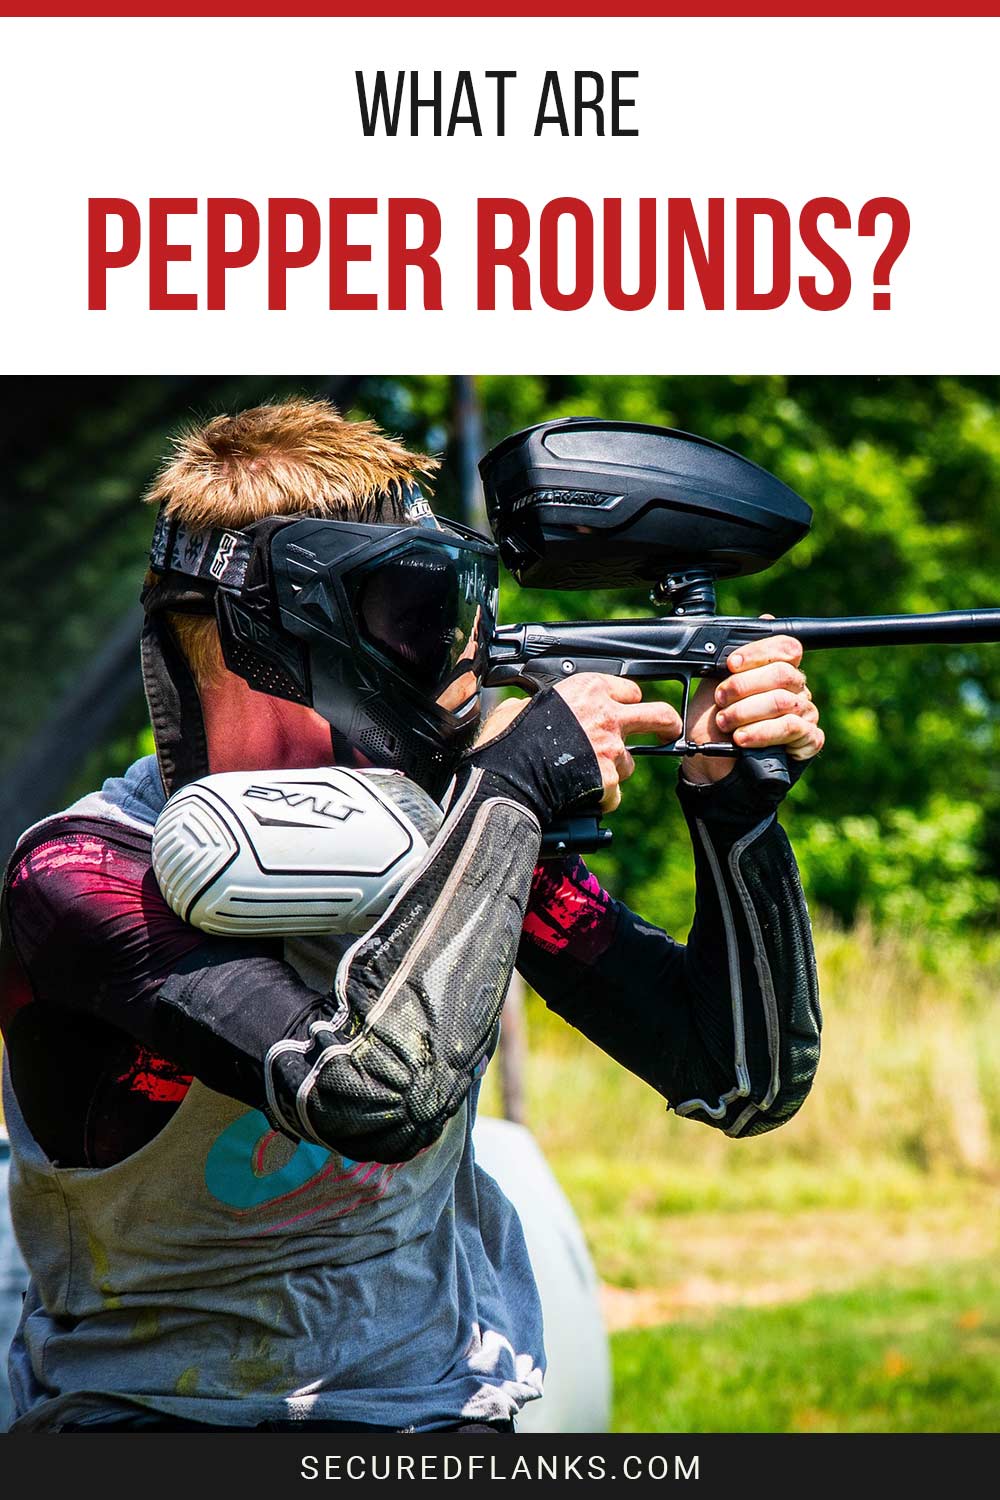 Man wearing paintball gears pointing a paintball gun - What Are Pepper Rounds?